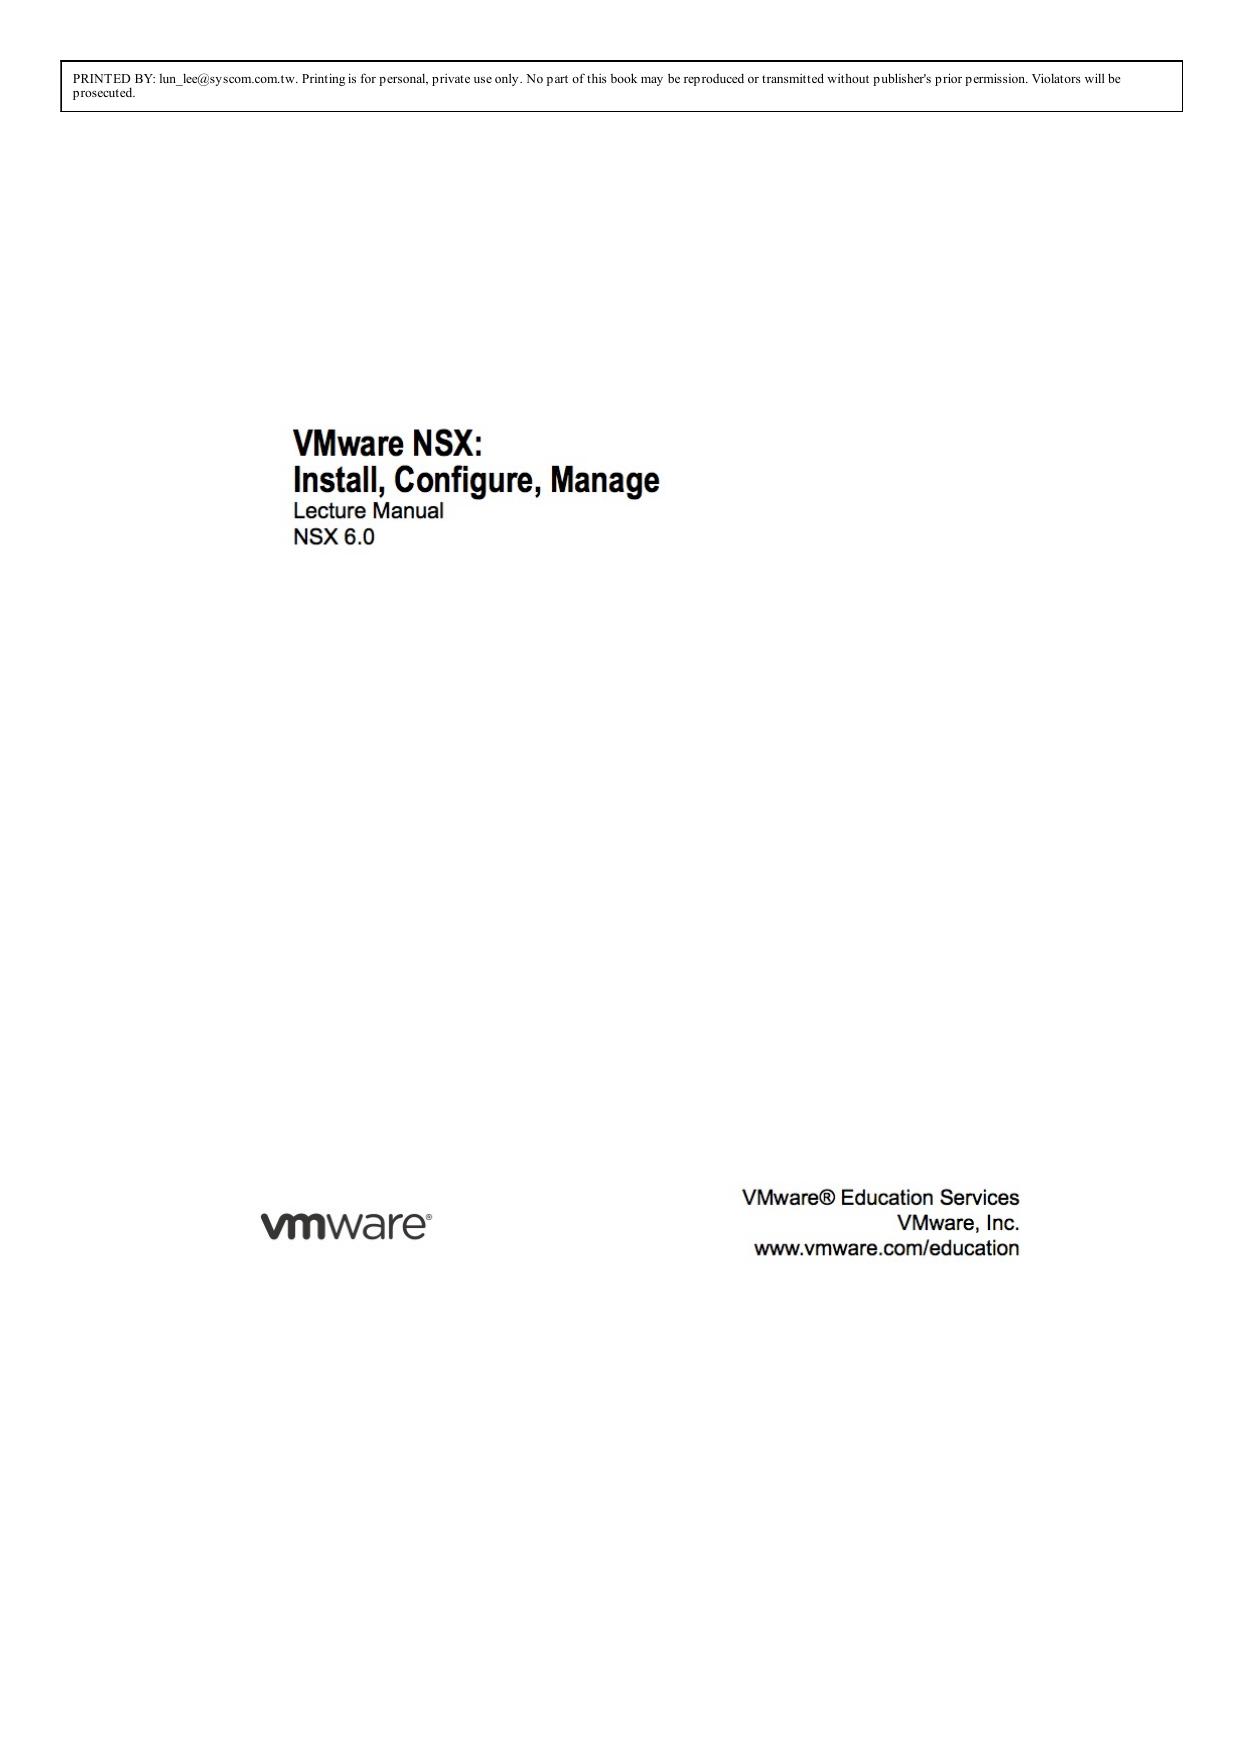 VMware NSX Install Configure,Manage Lecture Manual